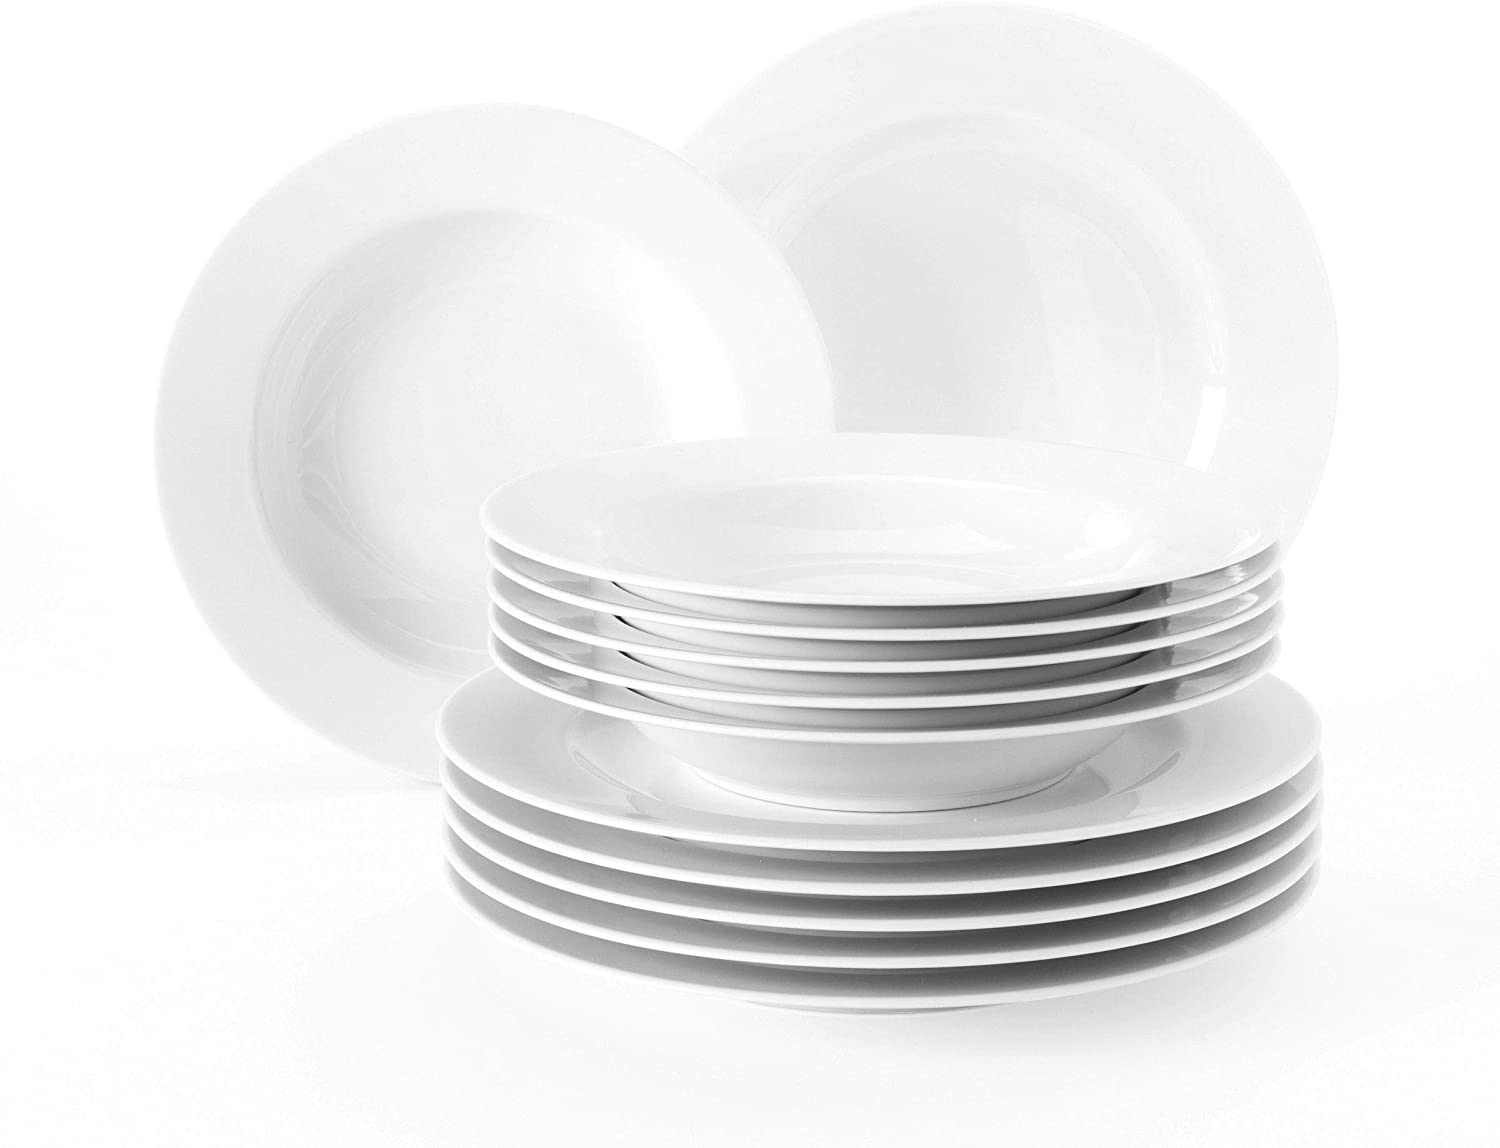 Seltmann Weiden 001.741309 Liane Dinner Service 12 Pieces White | Set for up to 6 People | Rondo Series | Includes 6 Dinner Plates and Soup Plates, Hard Porcelain